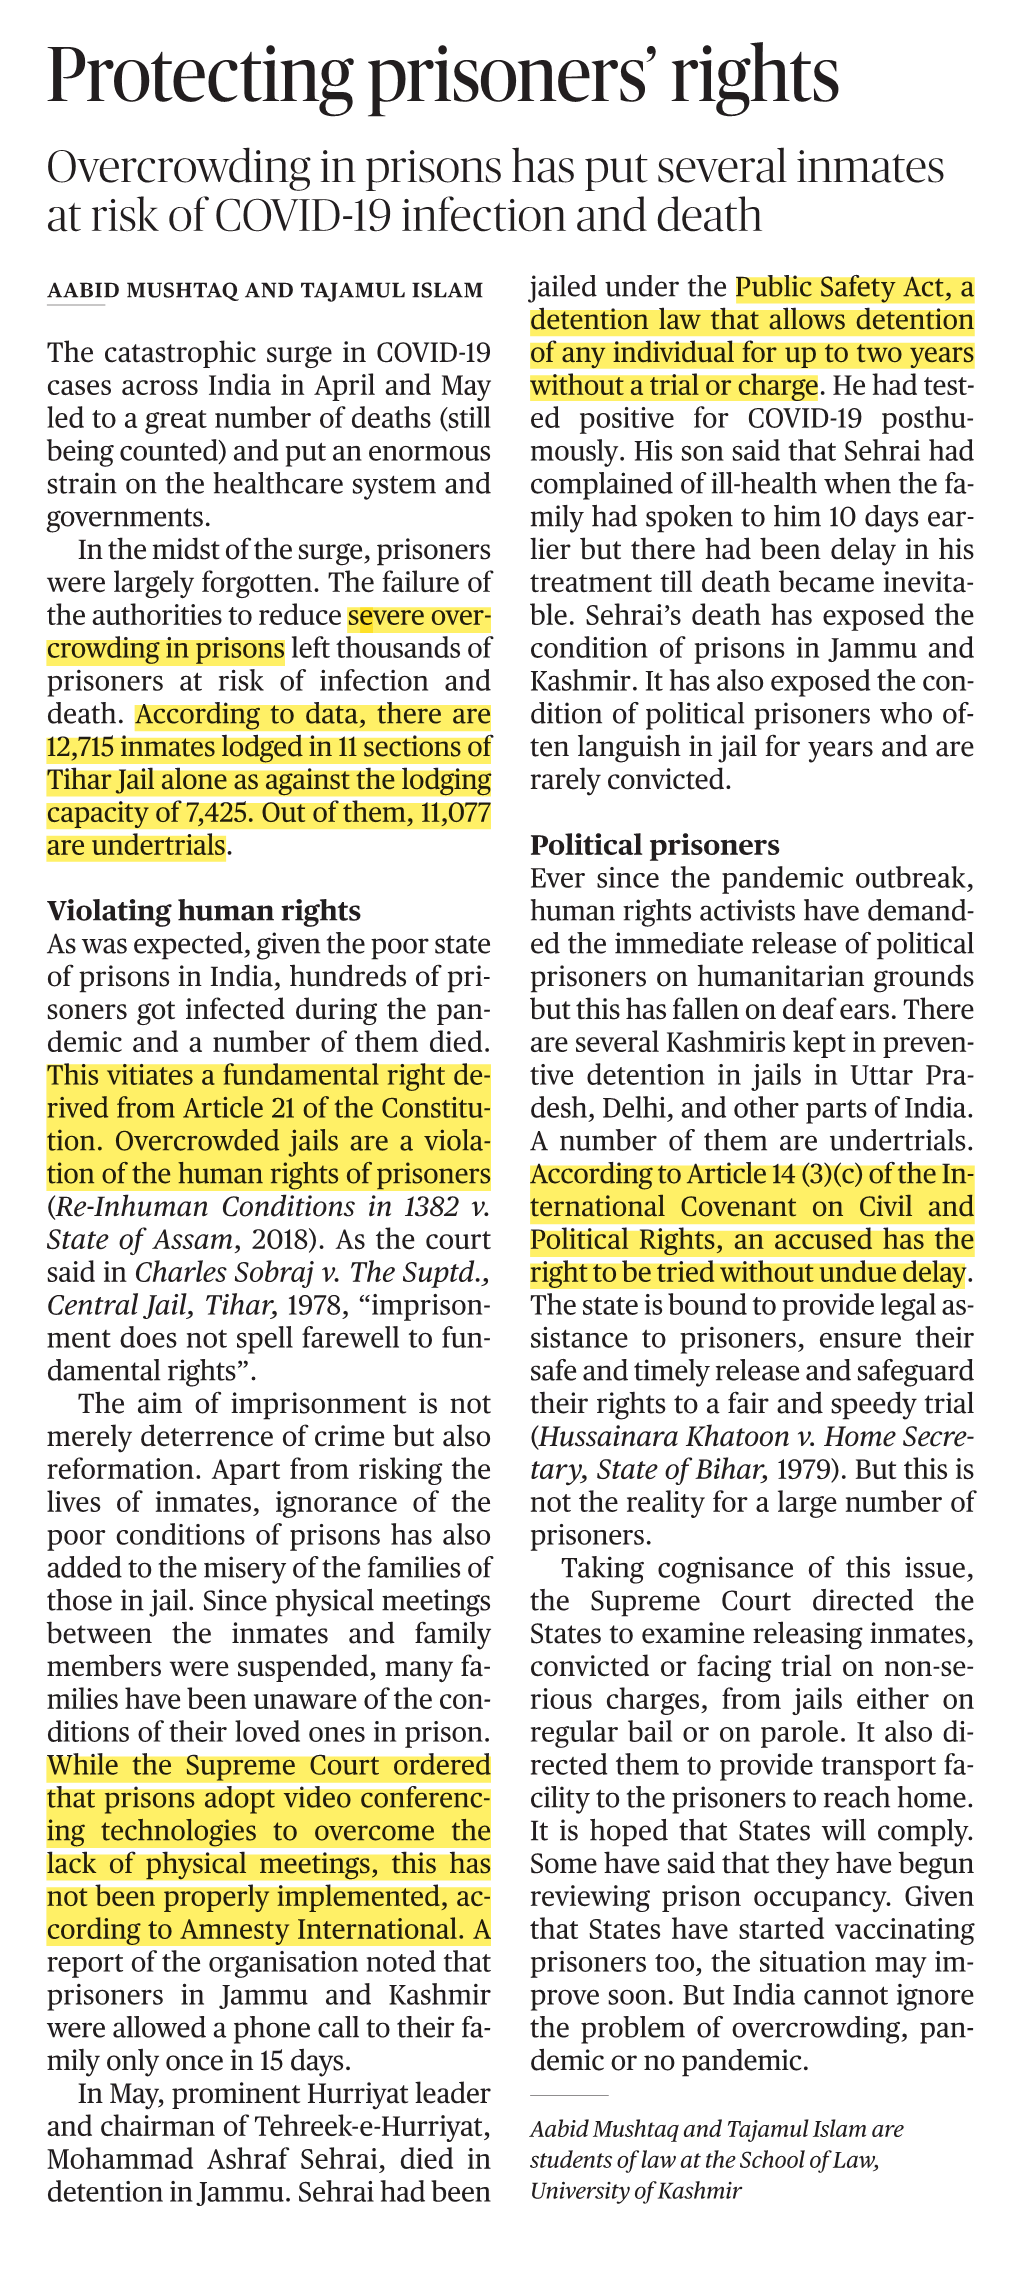 Protecting Prisoners' Rights